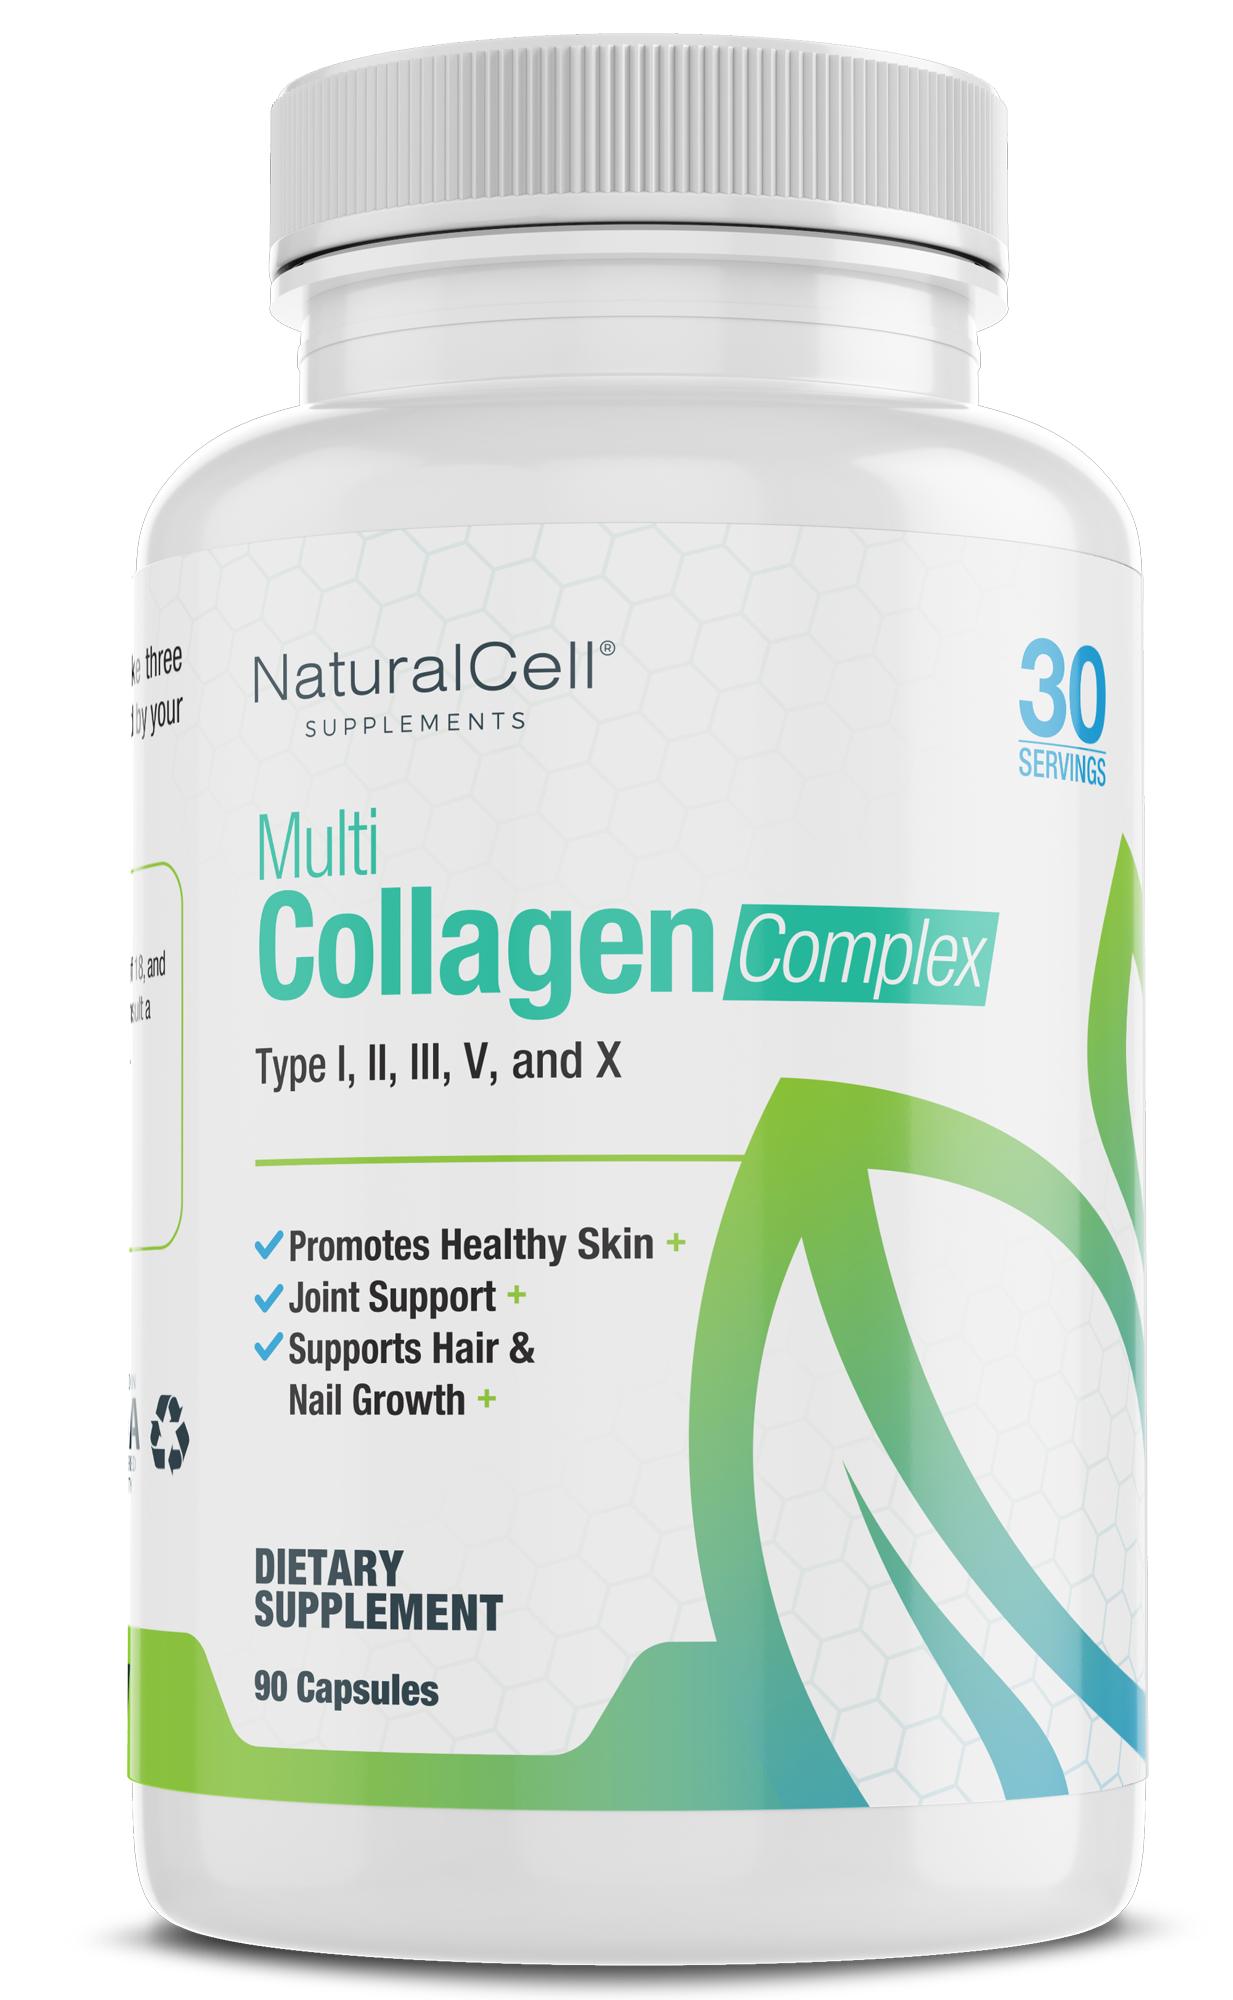 Multi Collagen Complex - Type I, II, III, IV, and V